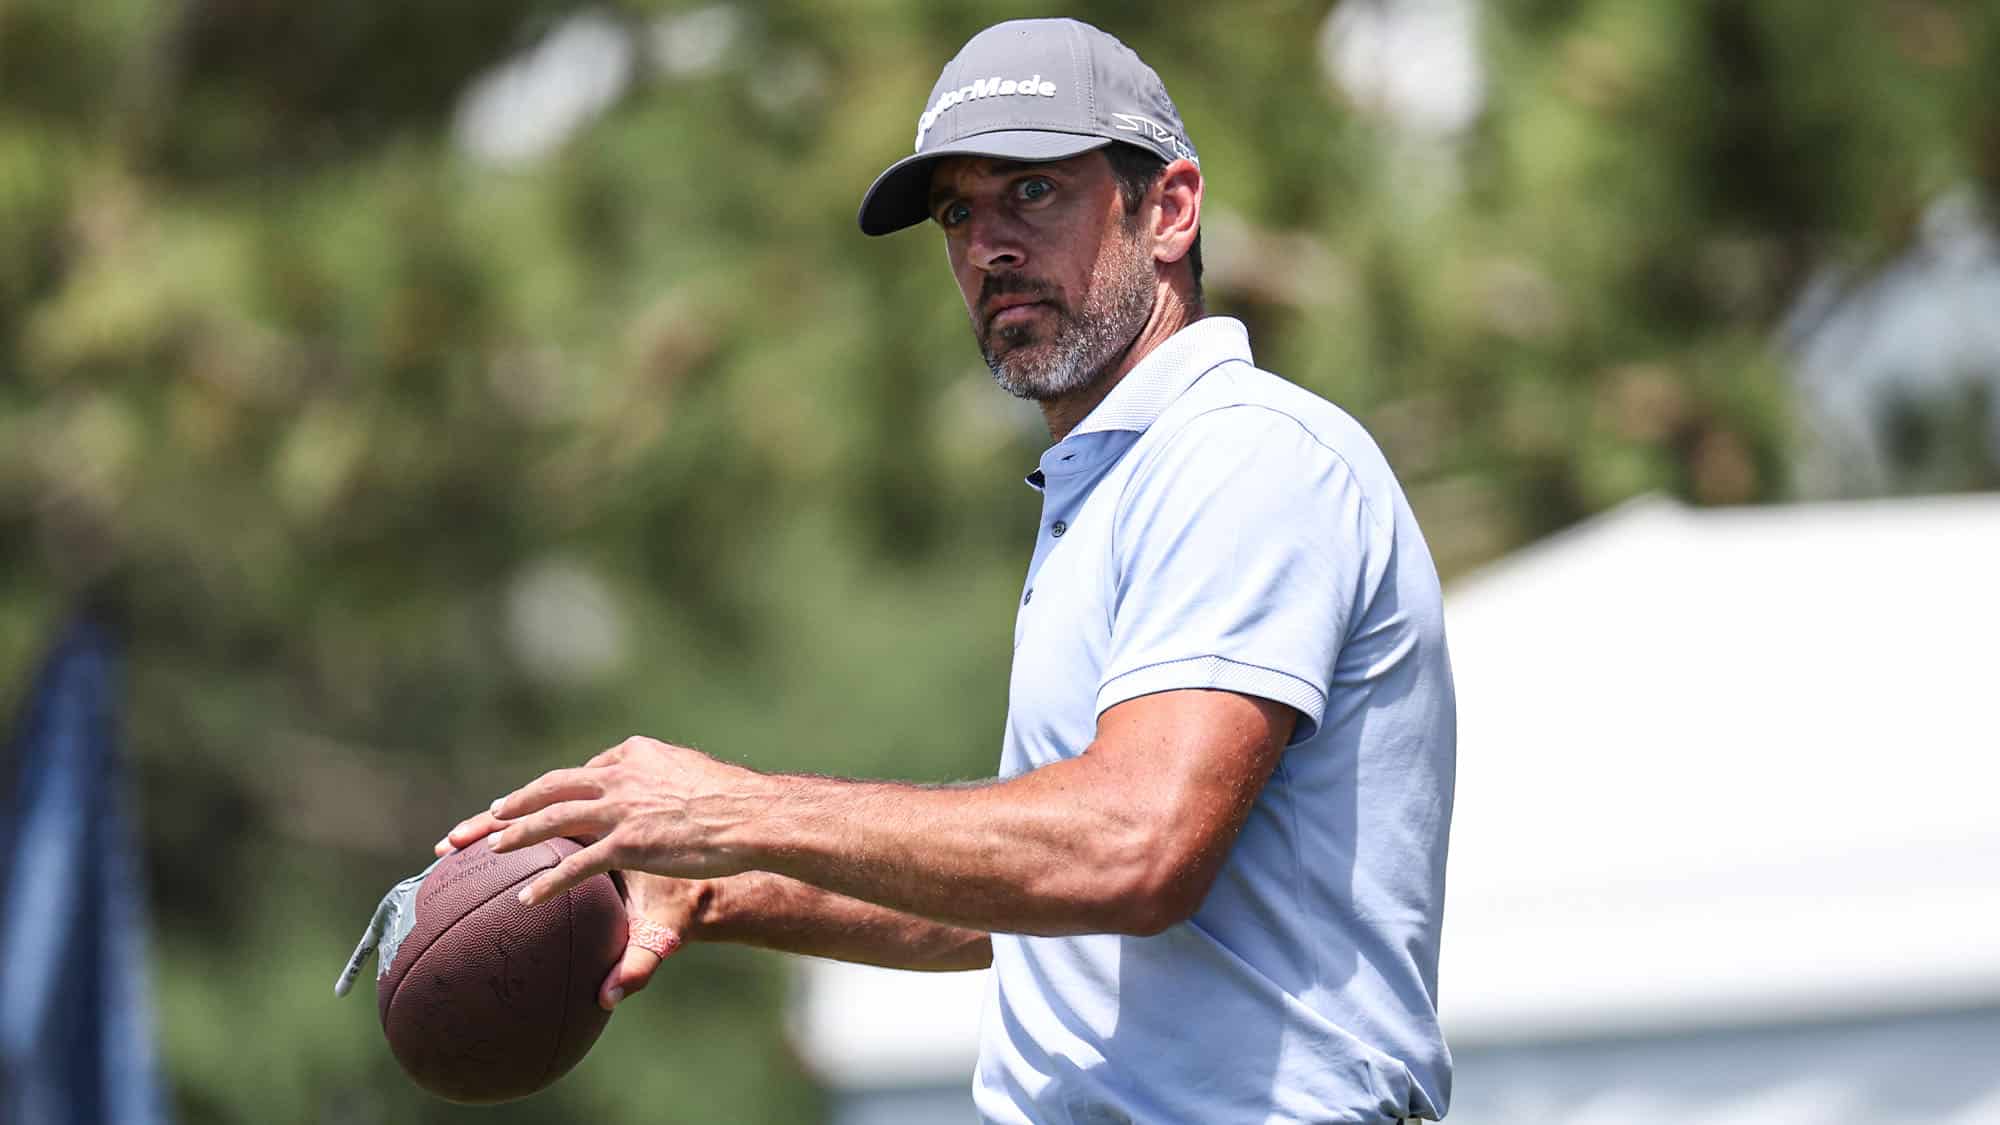 NY Jets, Aaron Rodgers, Decline, Golf